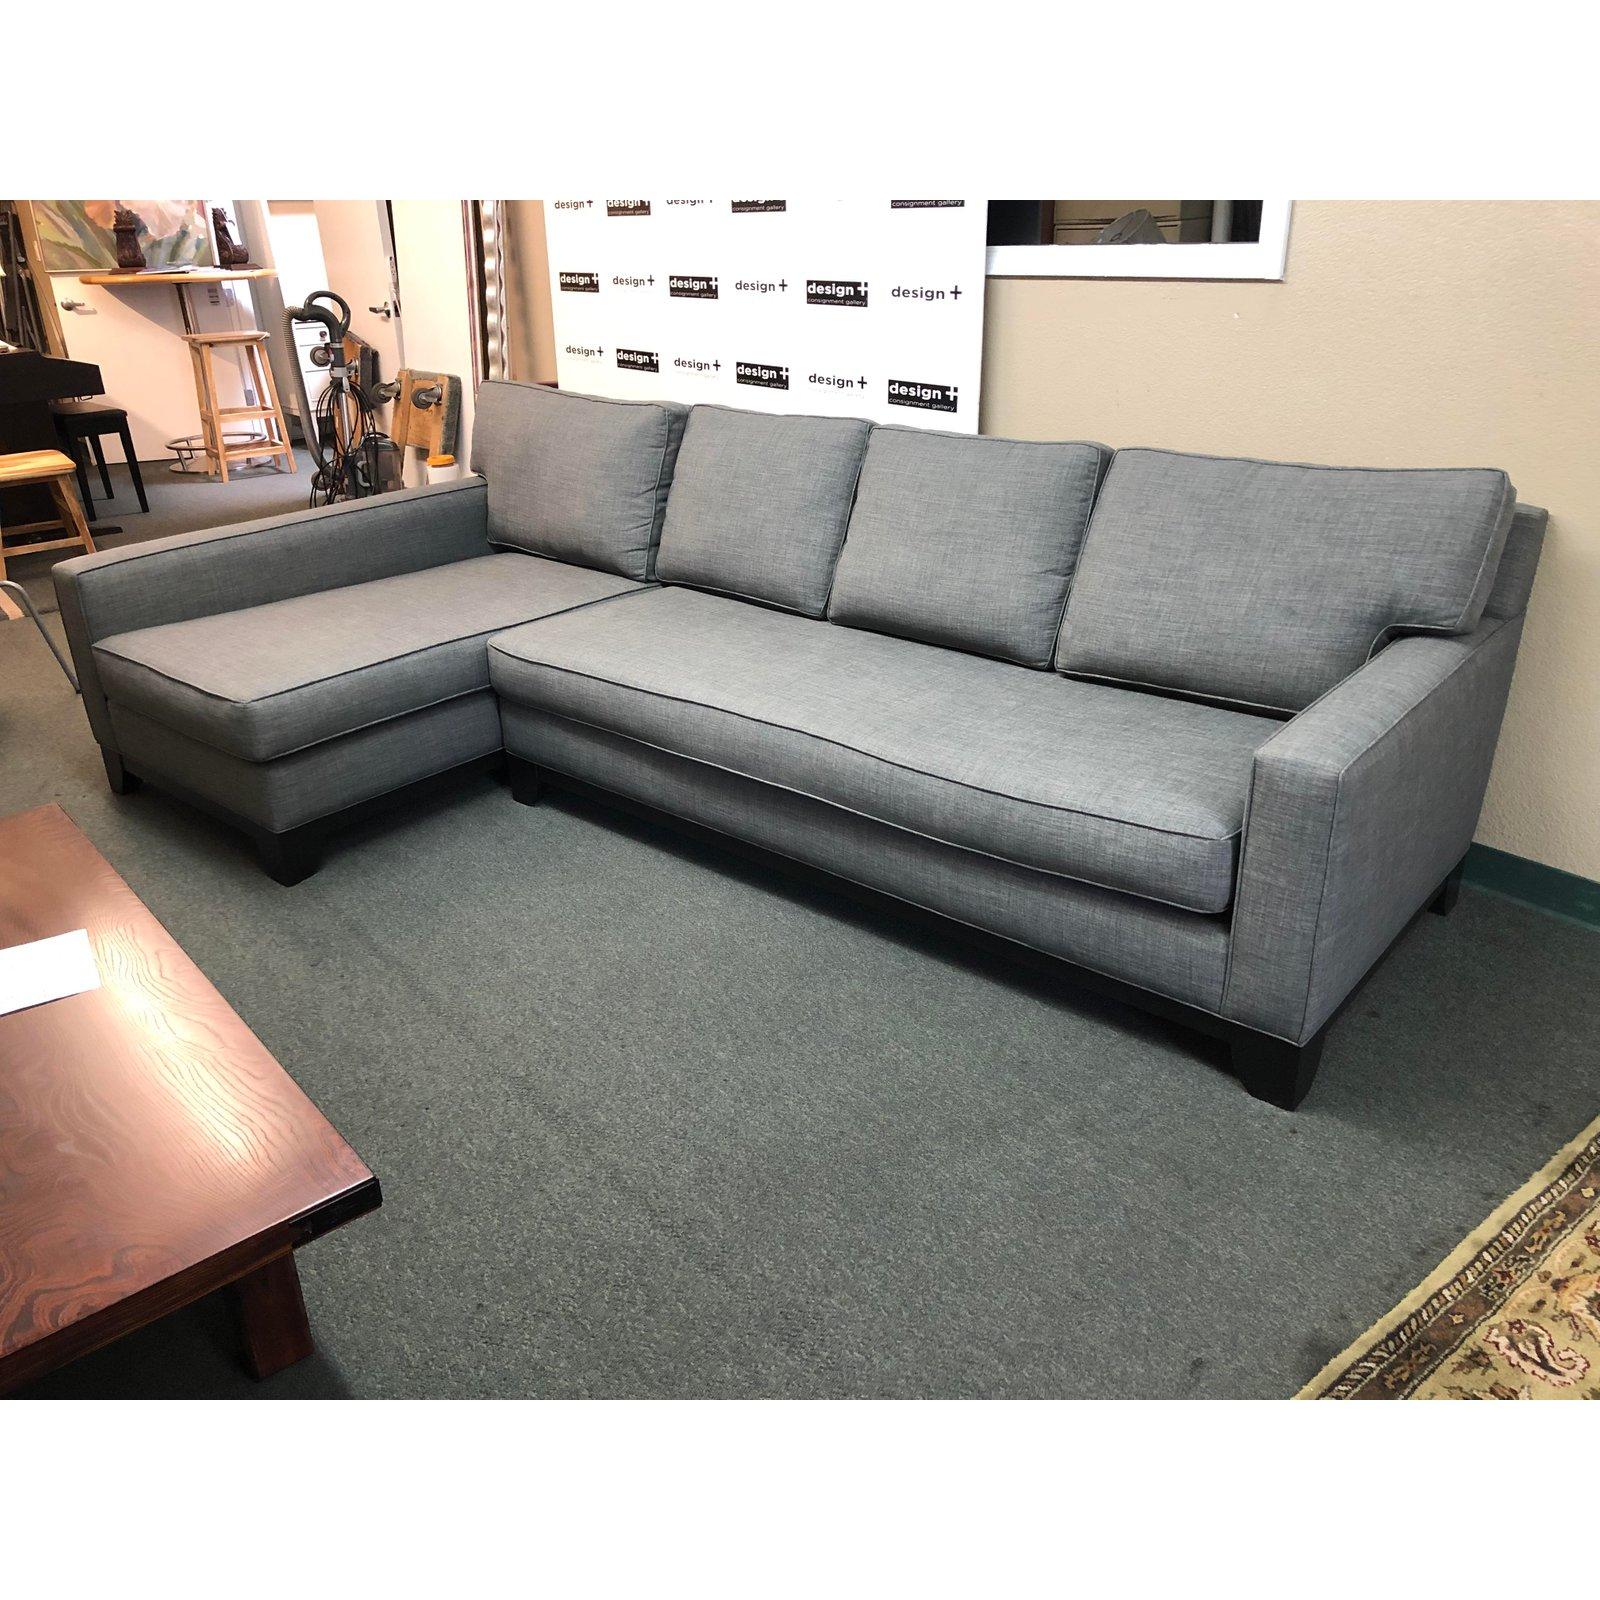 Fabric Nathan Anthony Custom 2-Piece Sectional For Sale